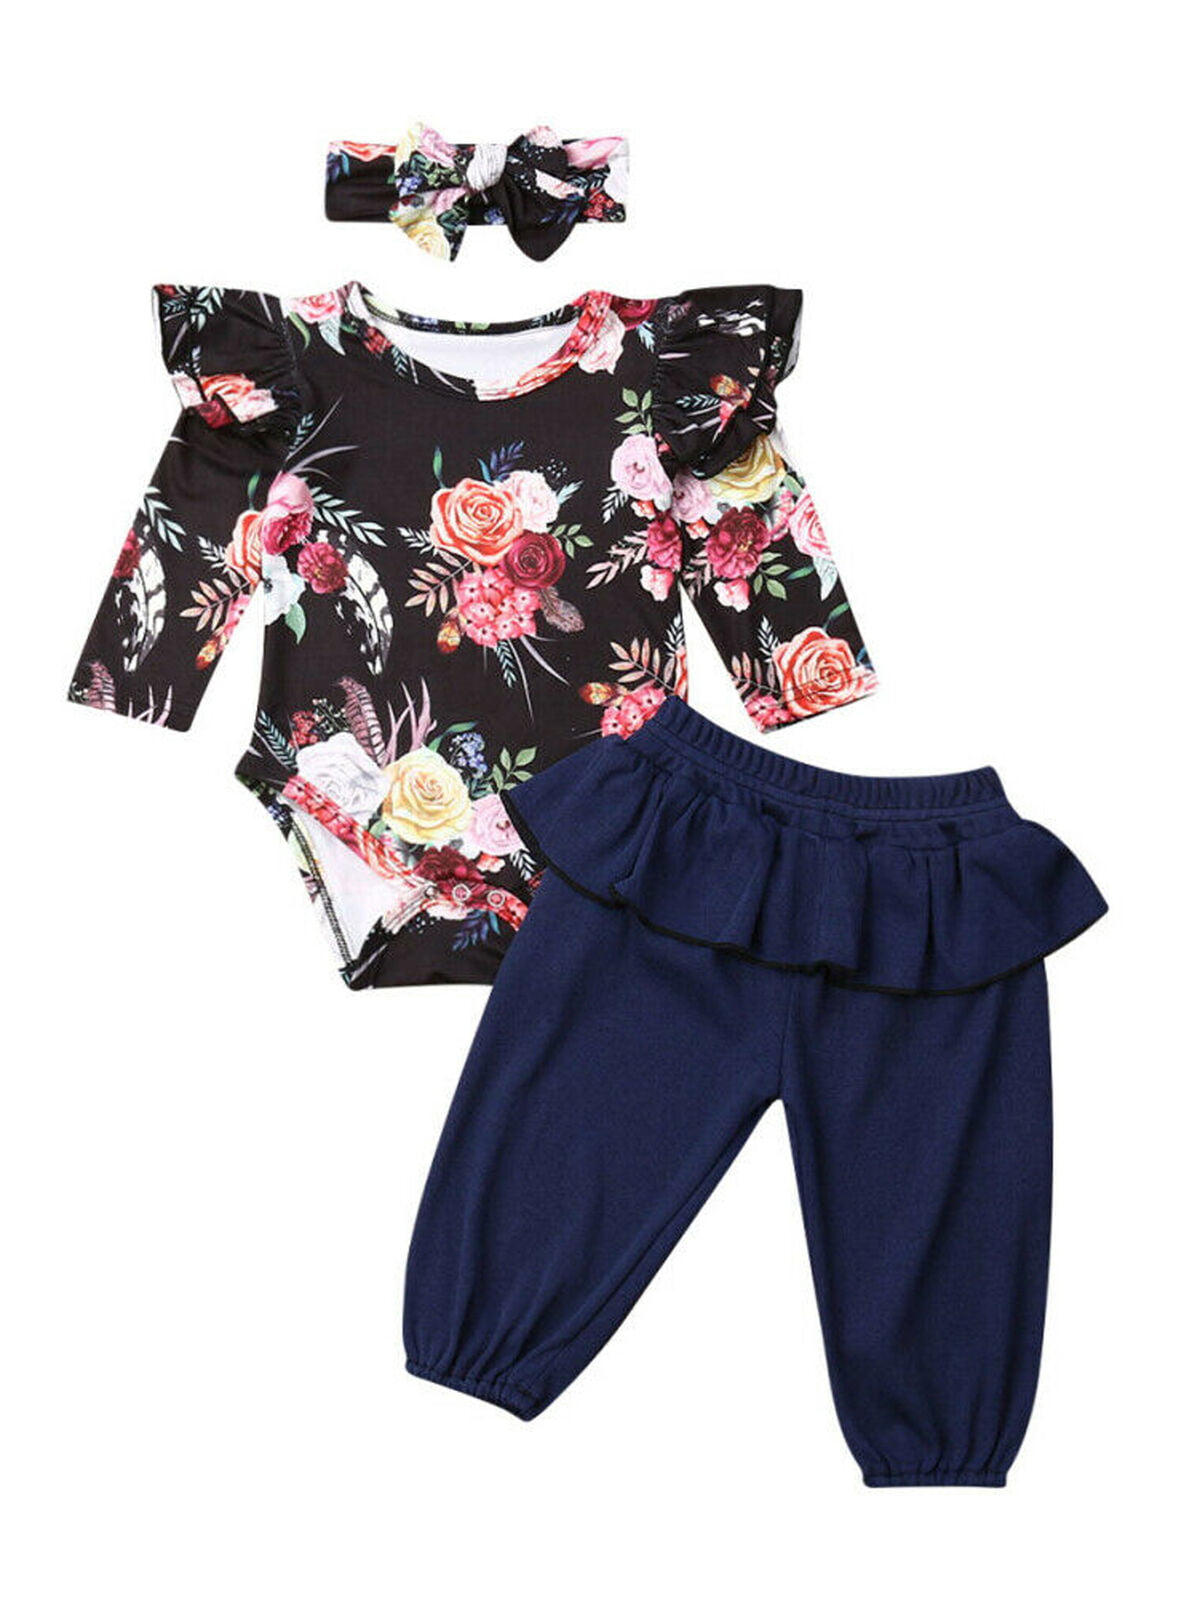 Details about   Toddler Infant Kids Baby Girls Floral Clothes Romper Tops Pants Outfits USA 